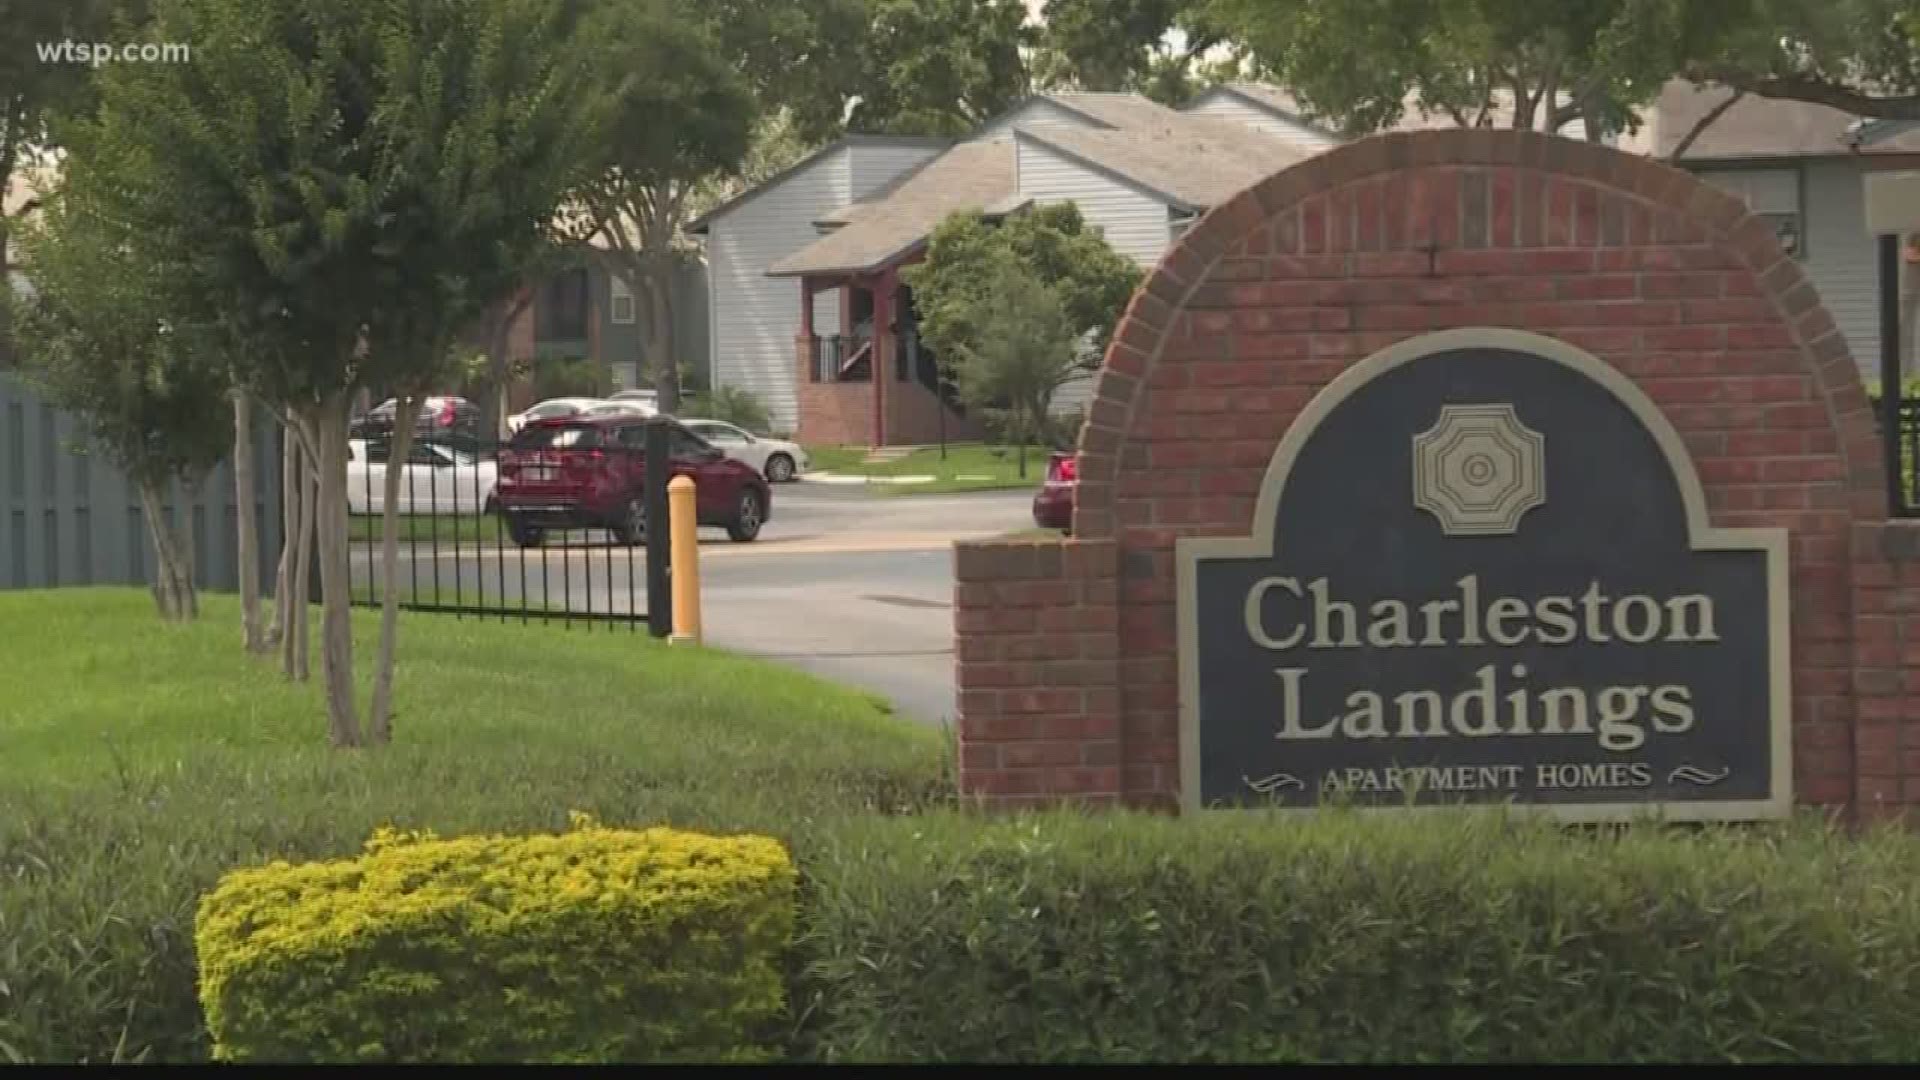 Hillsborough County deputies continue to investigate after a mother of four children was found dead at a Brandon apartment complex Tuesday afternoon.

Sheriff Chad Chronister says the sheriff's office received a 911 call around 12:25 p.m. from a witness who advised she heard about a boyfriend who harmed his girlfriend.

"She said she believed that she was dead, but wasn't sure if she was dead or not," Chronister said during a press conference. 

After checking several locations, deputies found a 25-year-old female victim, Chronister said, adding that the victim had succumbed to her injuries "as a result of this family violence incident."